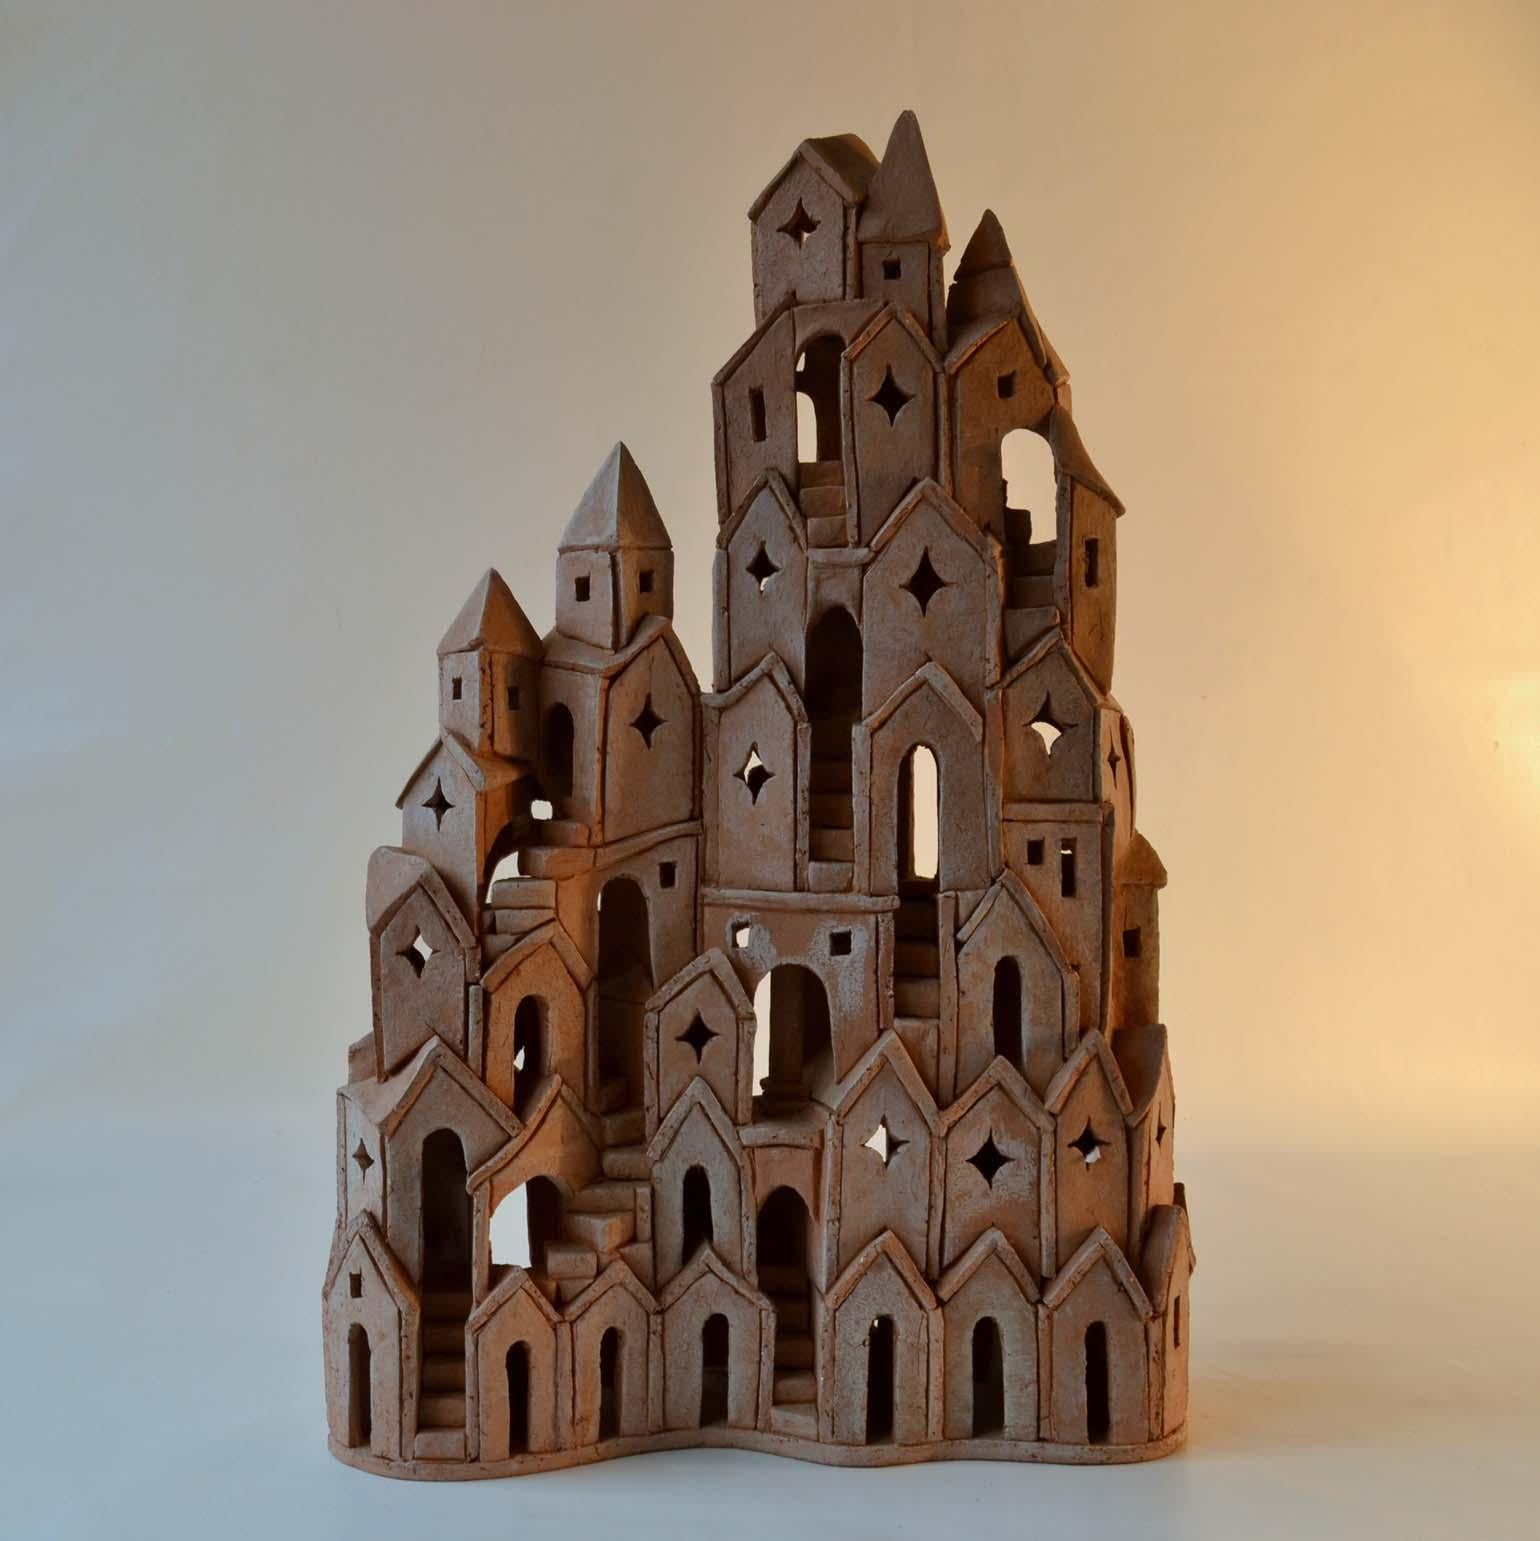 Architectural Surreal Ceramic Tower Sculpture 2 by Dutch Arie Bouter 1995 1